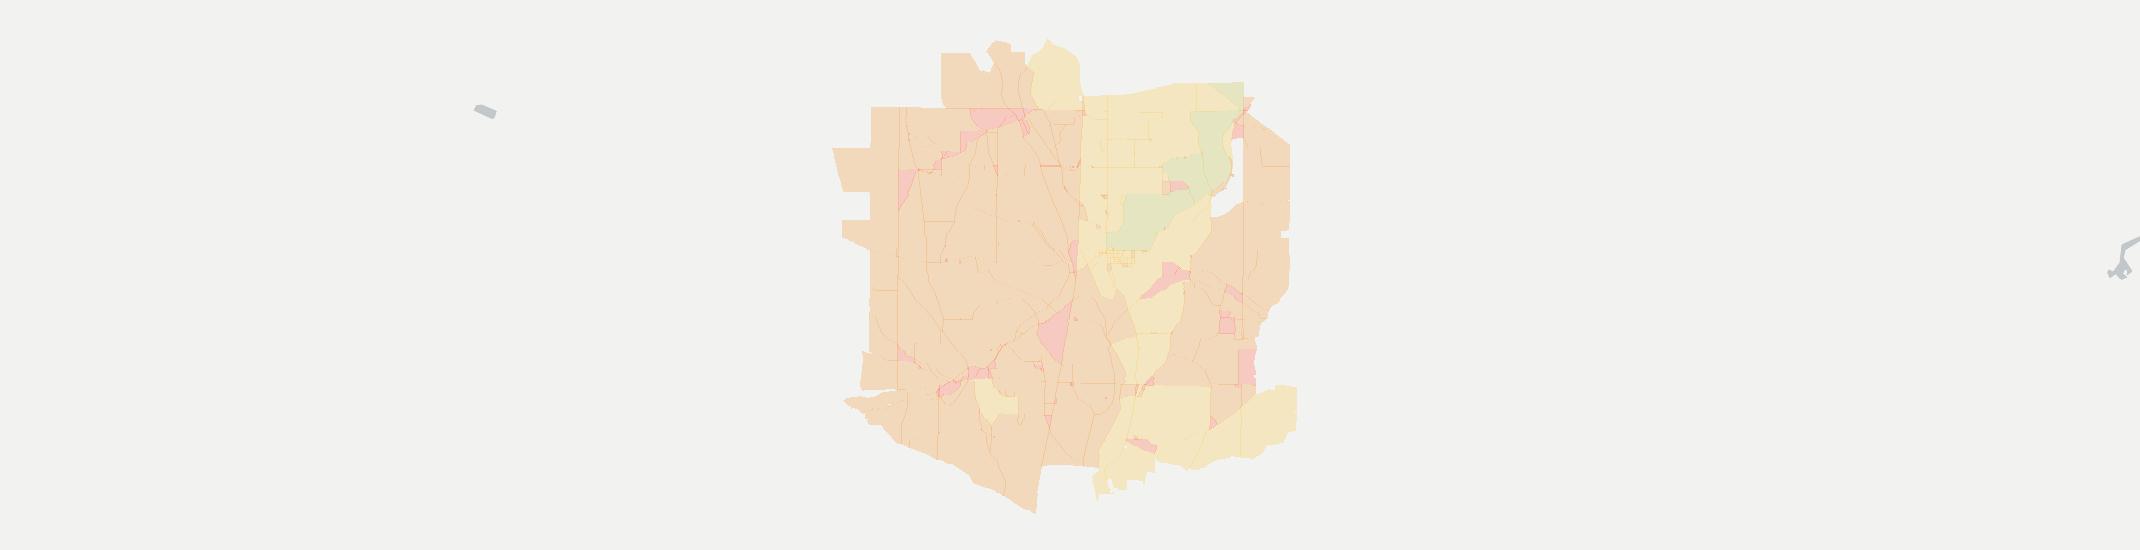 Holmesville Internet Competition Map. Click for interactive map